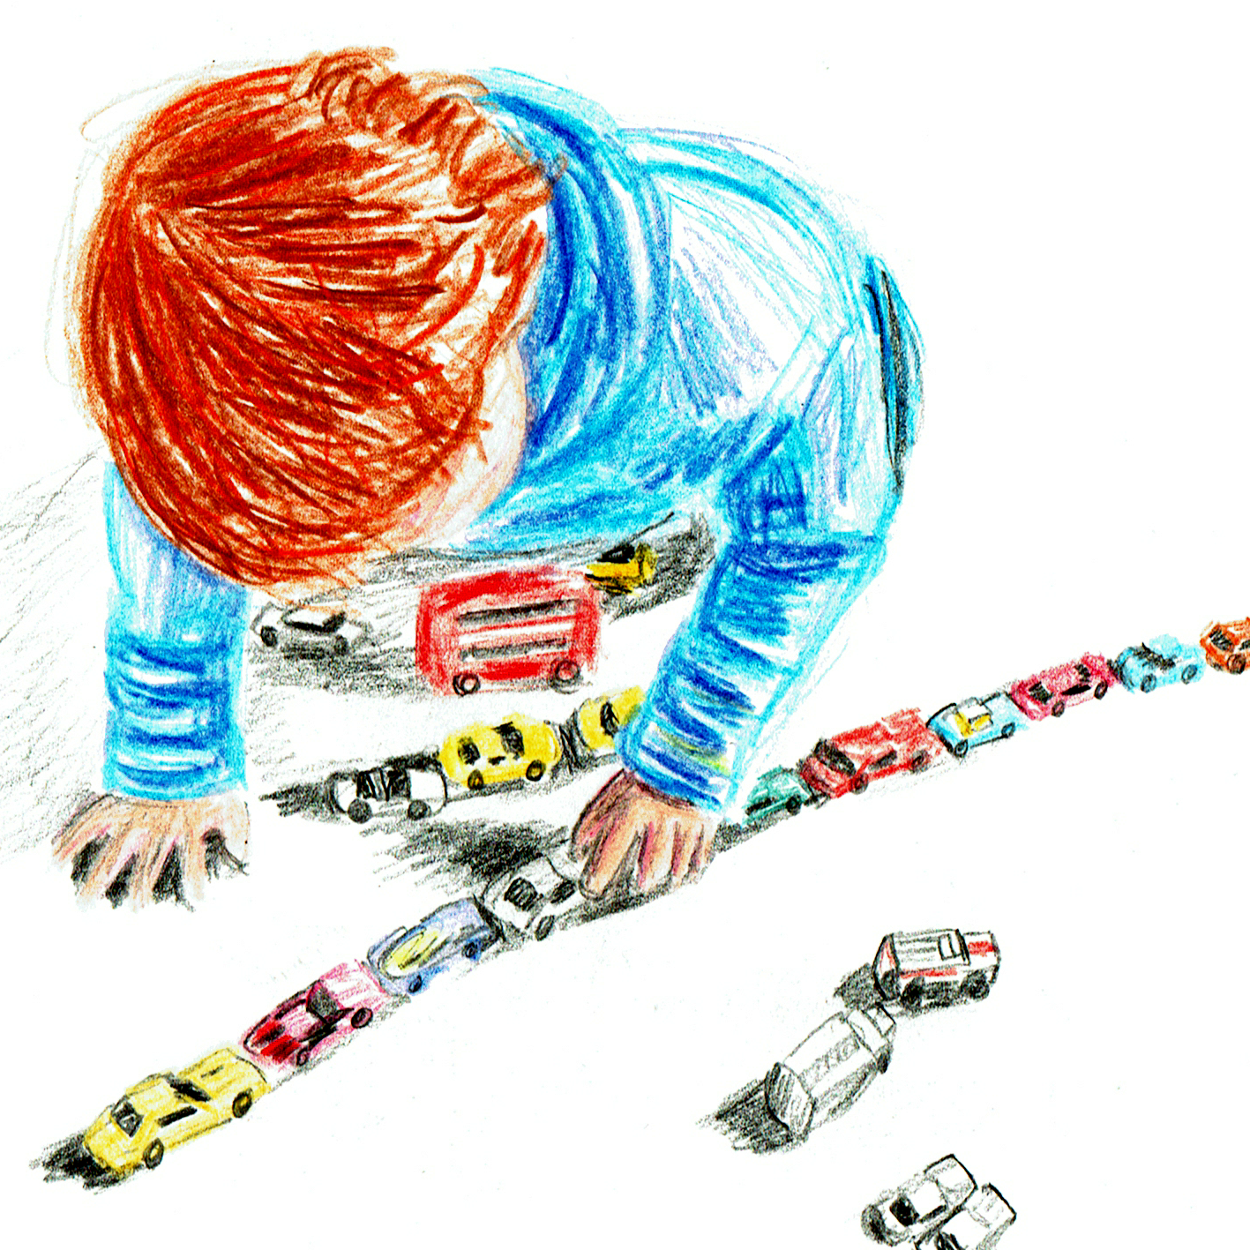 Laurie-playing-car-town-edited_1417_1250.png